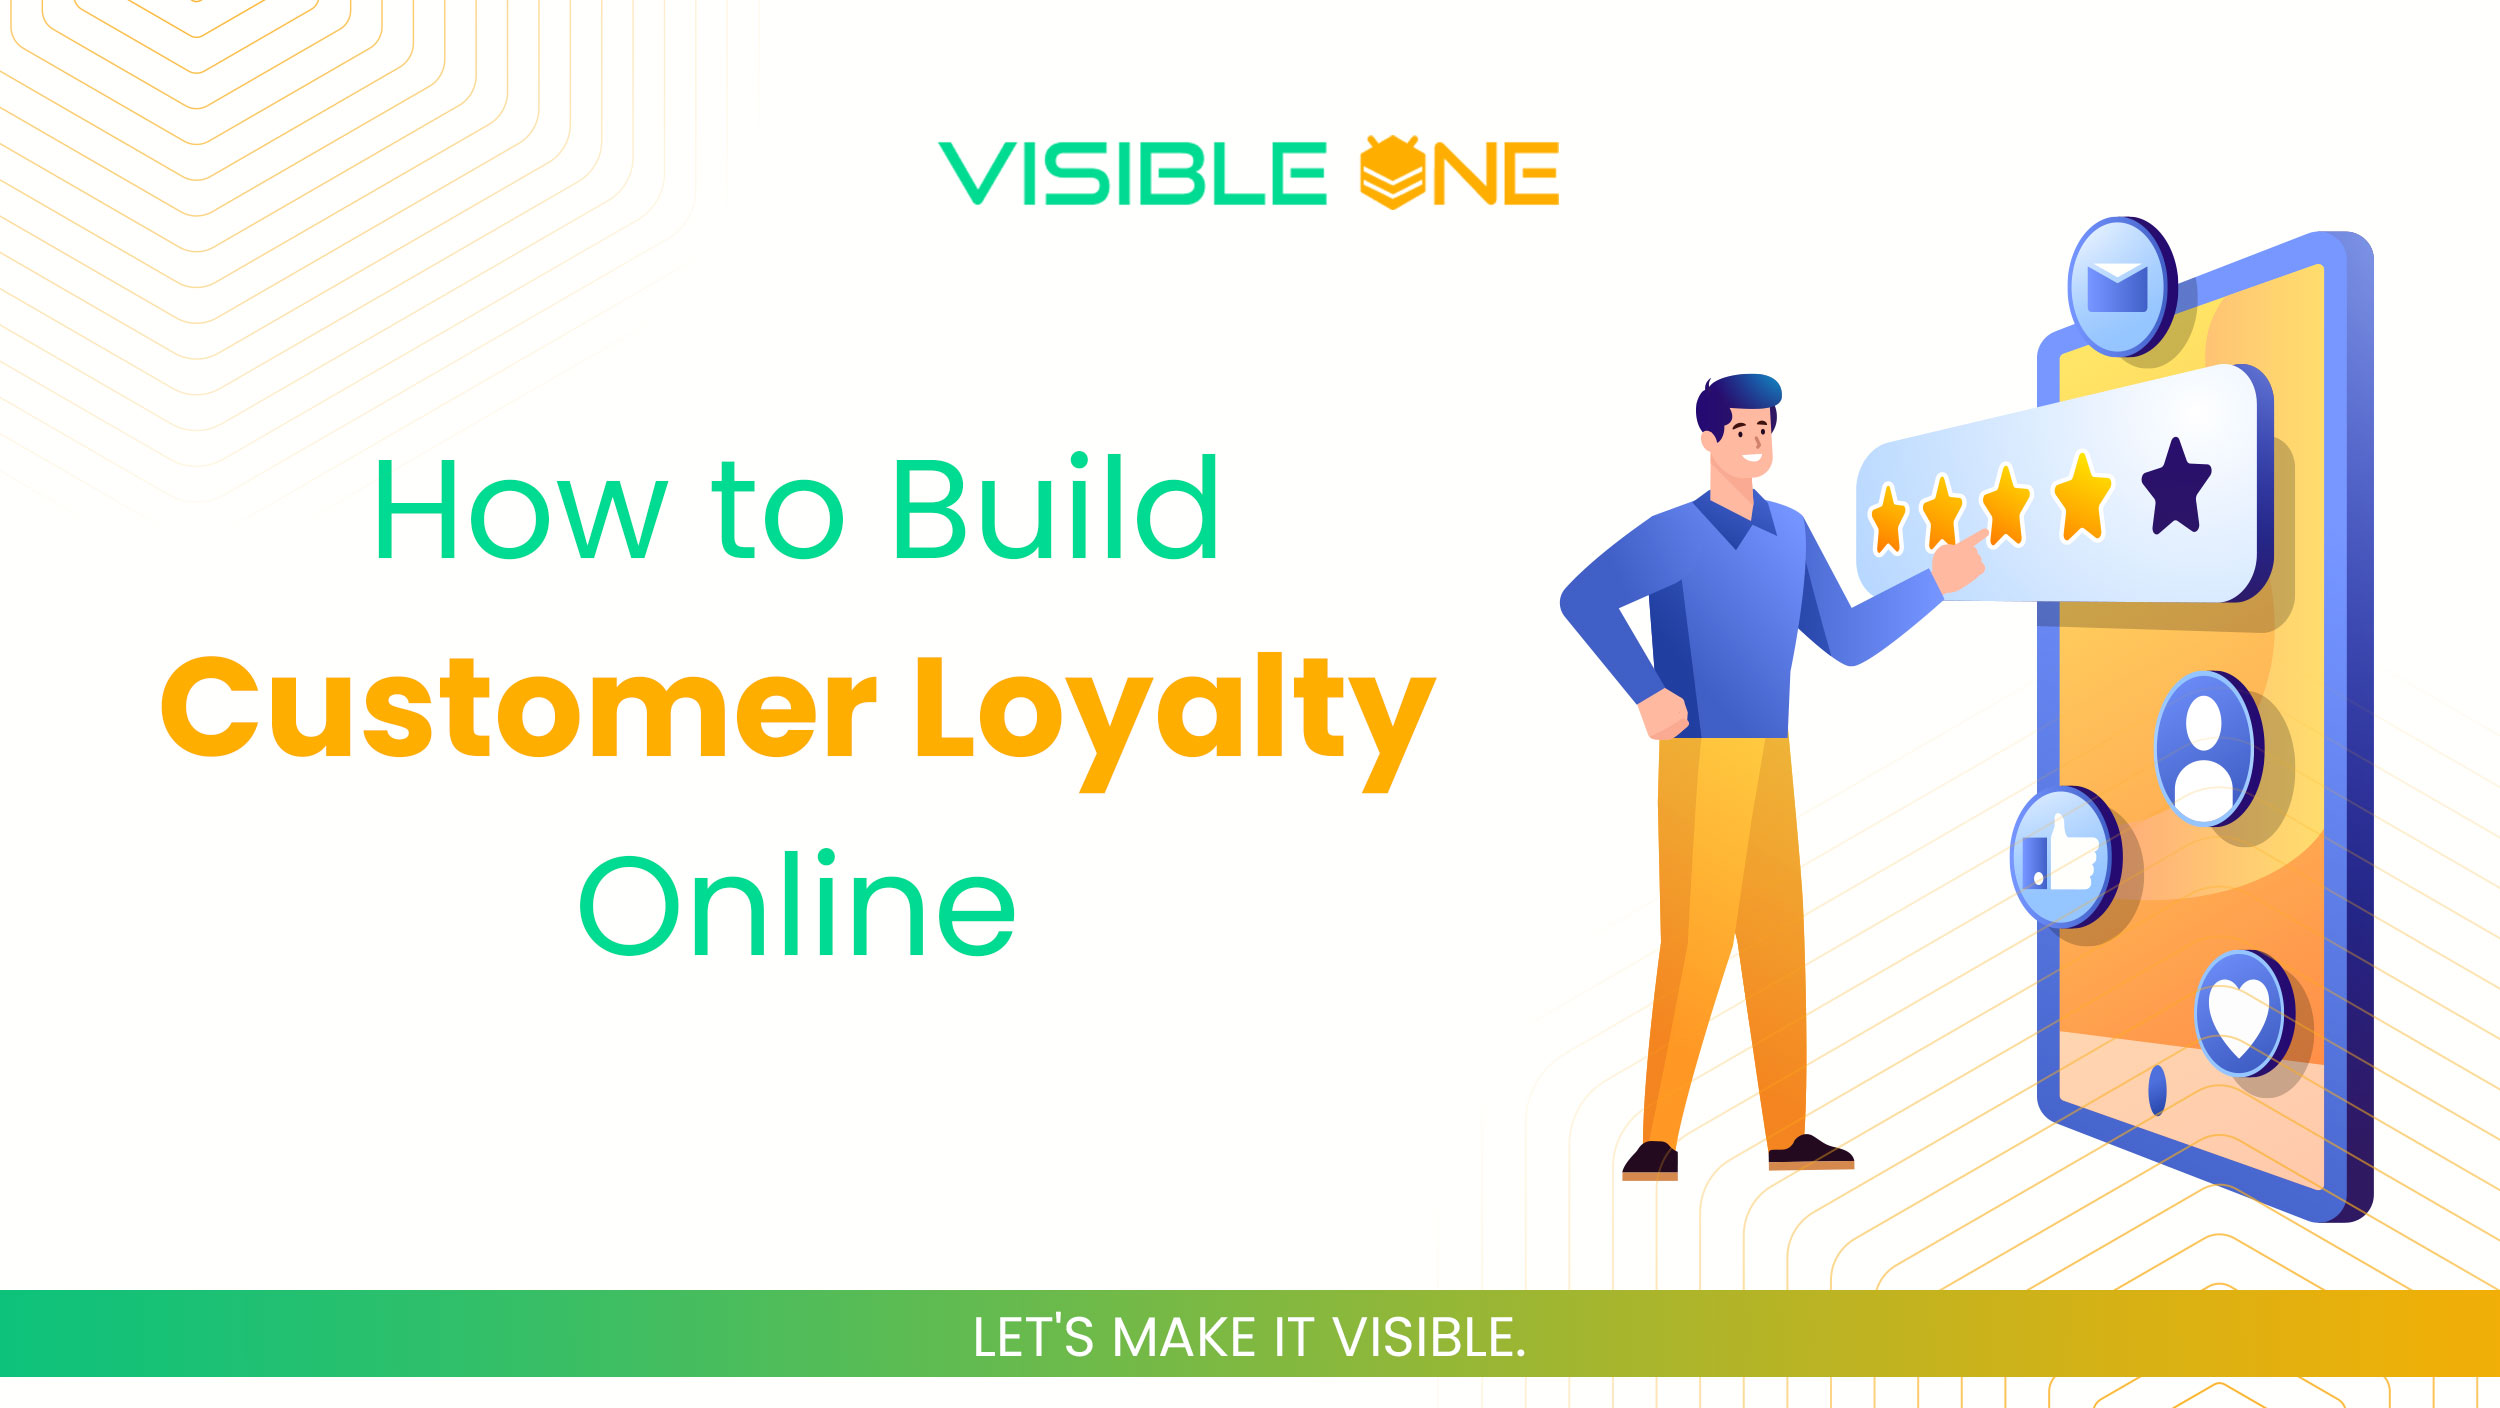 How to Build Customer Loyalty Online